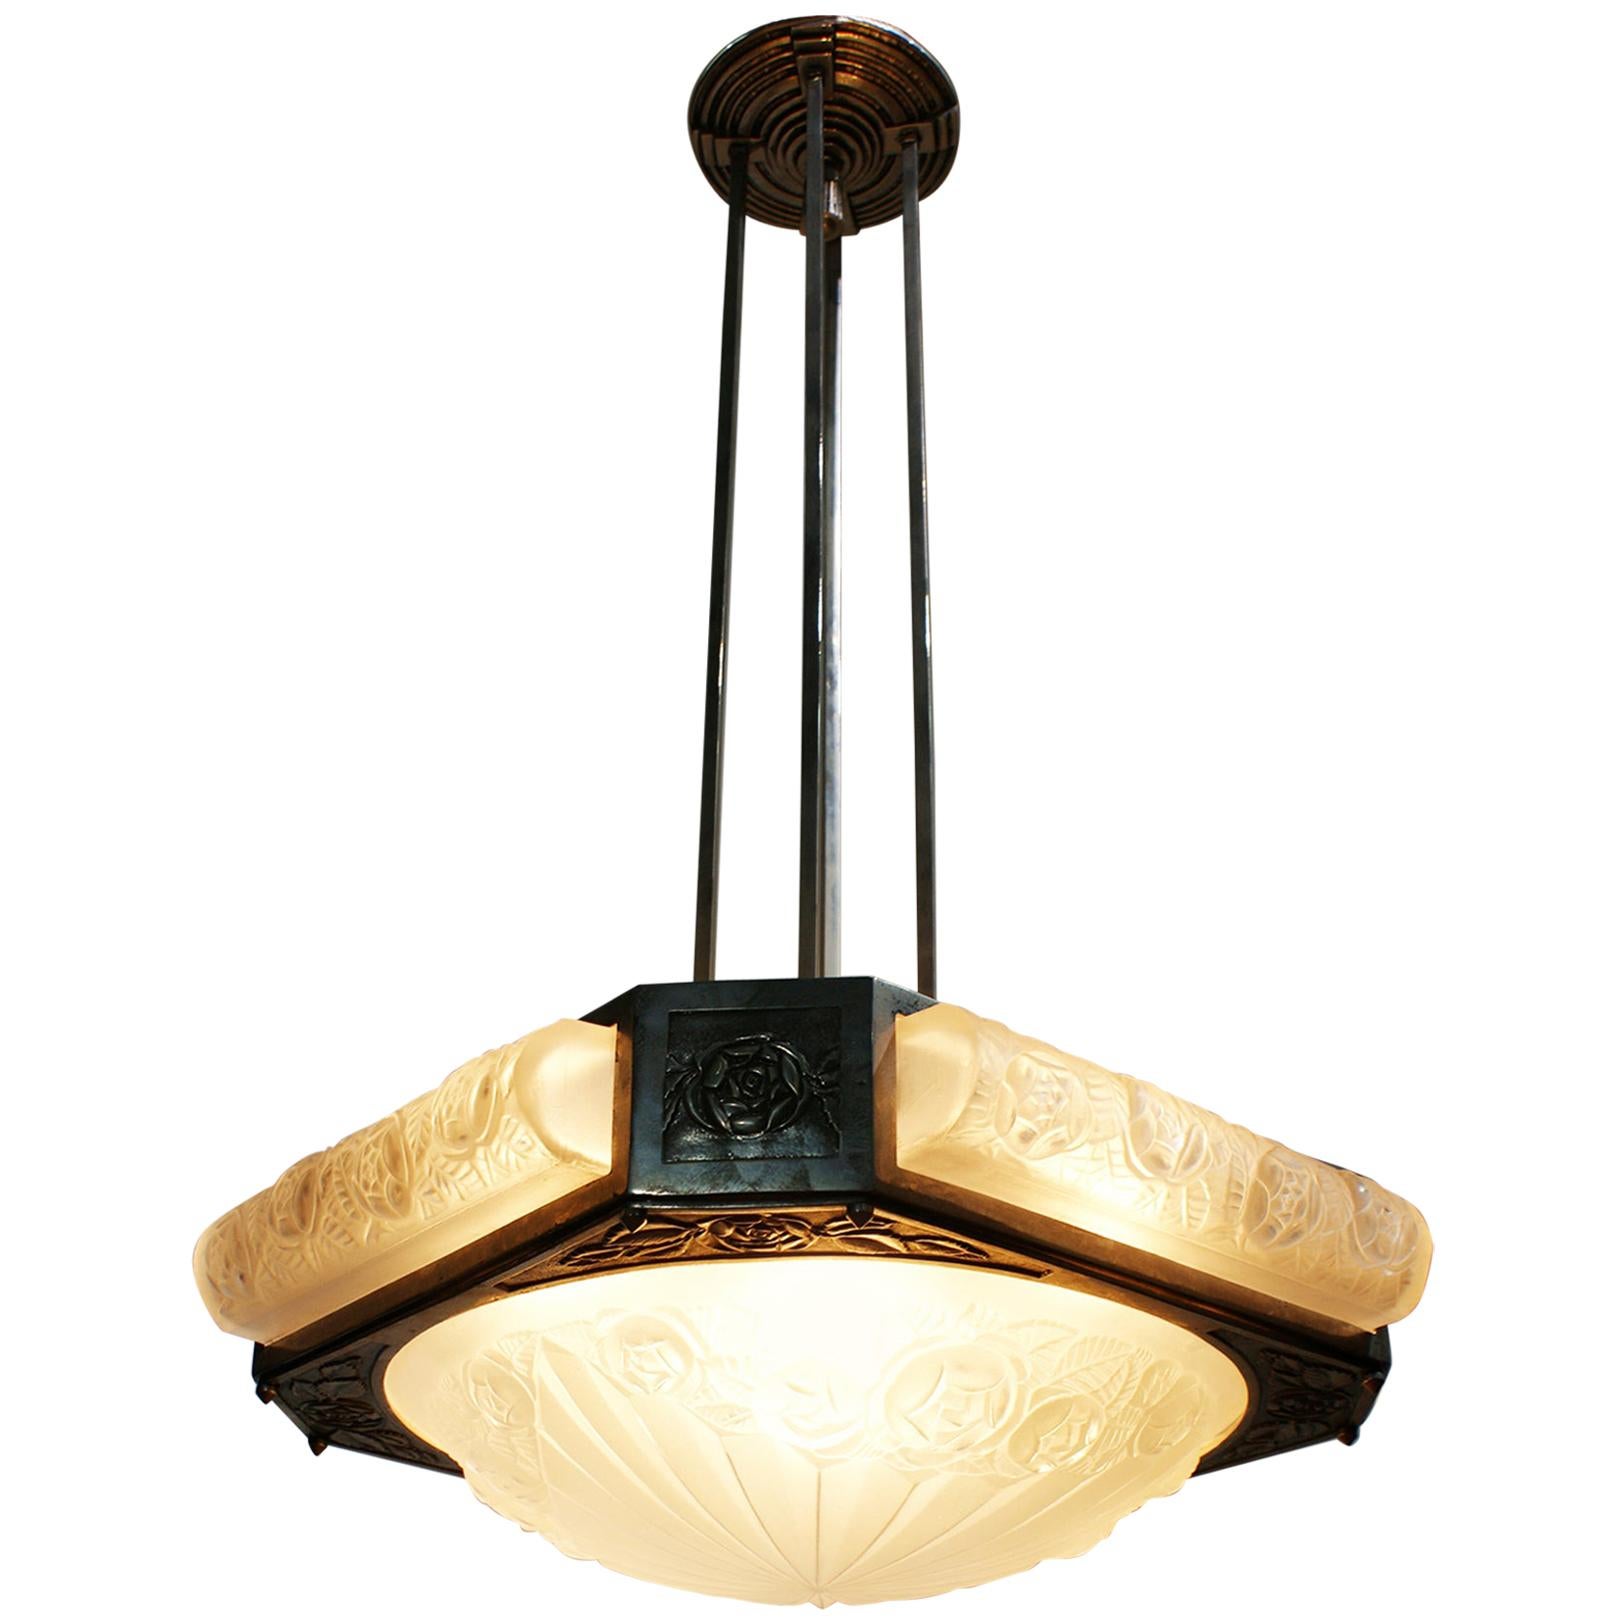 French Art Deco Chandelier Signed by Degué, France, circa 1930